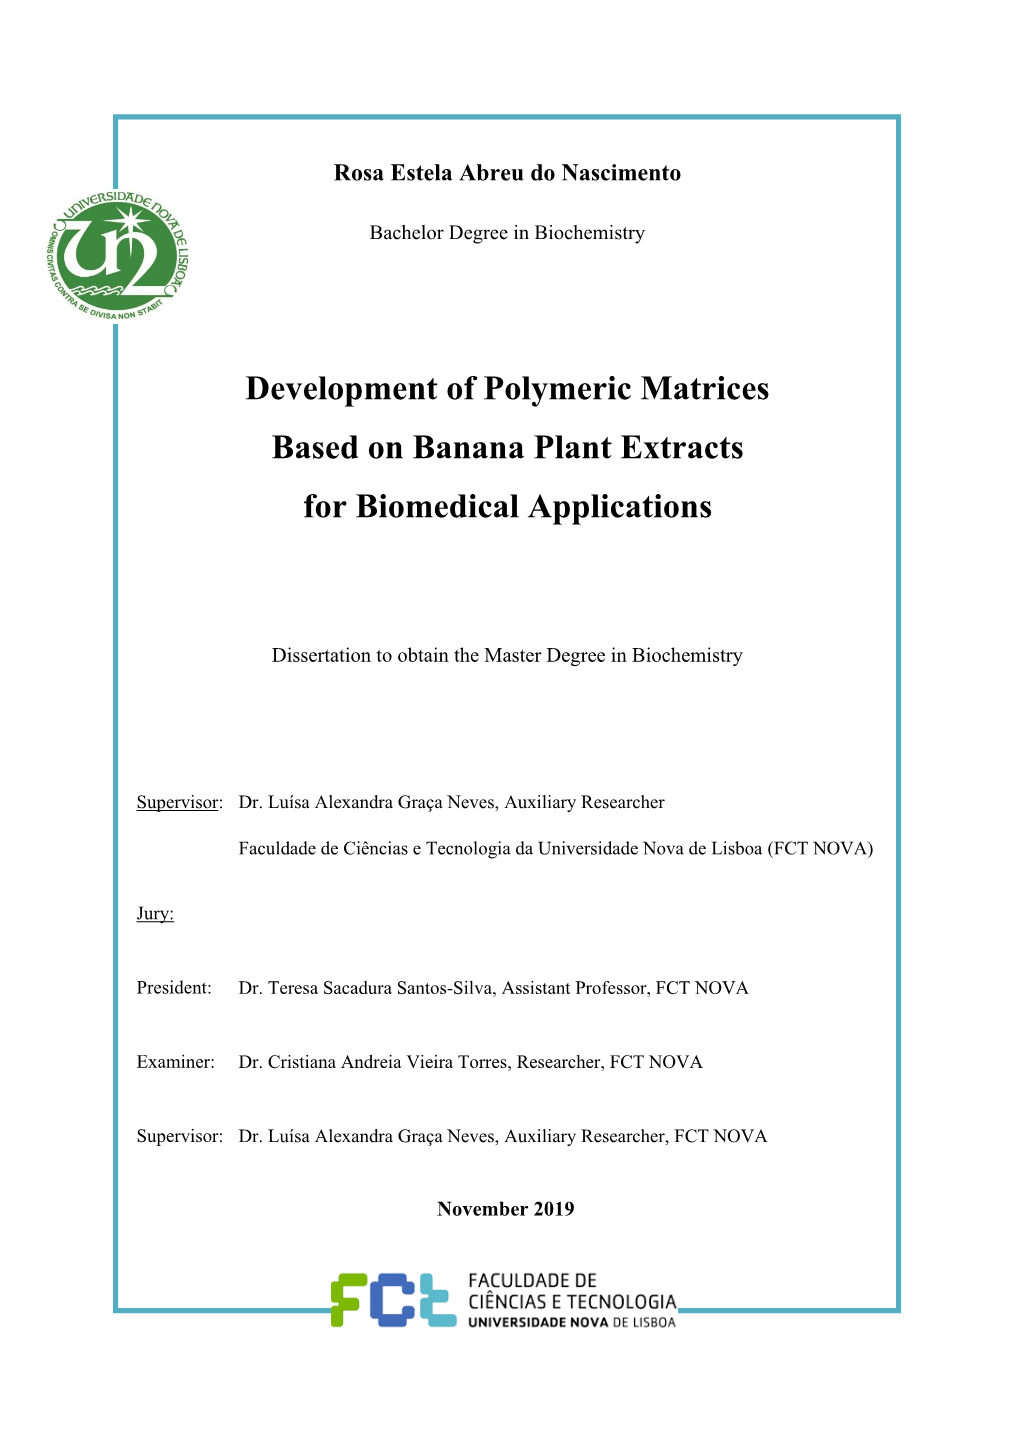 Development of Polymeric Matrices Based on Banana Plant Extracts for Biomedical Applications